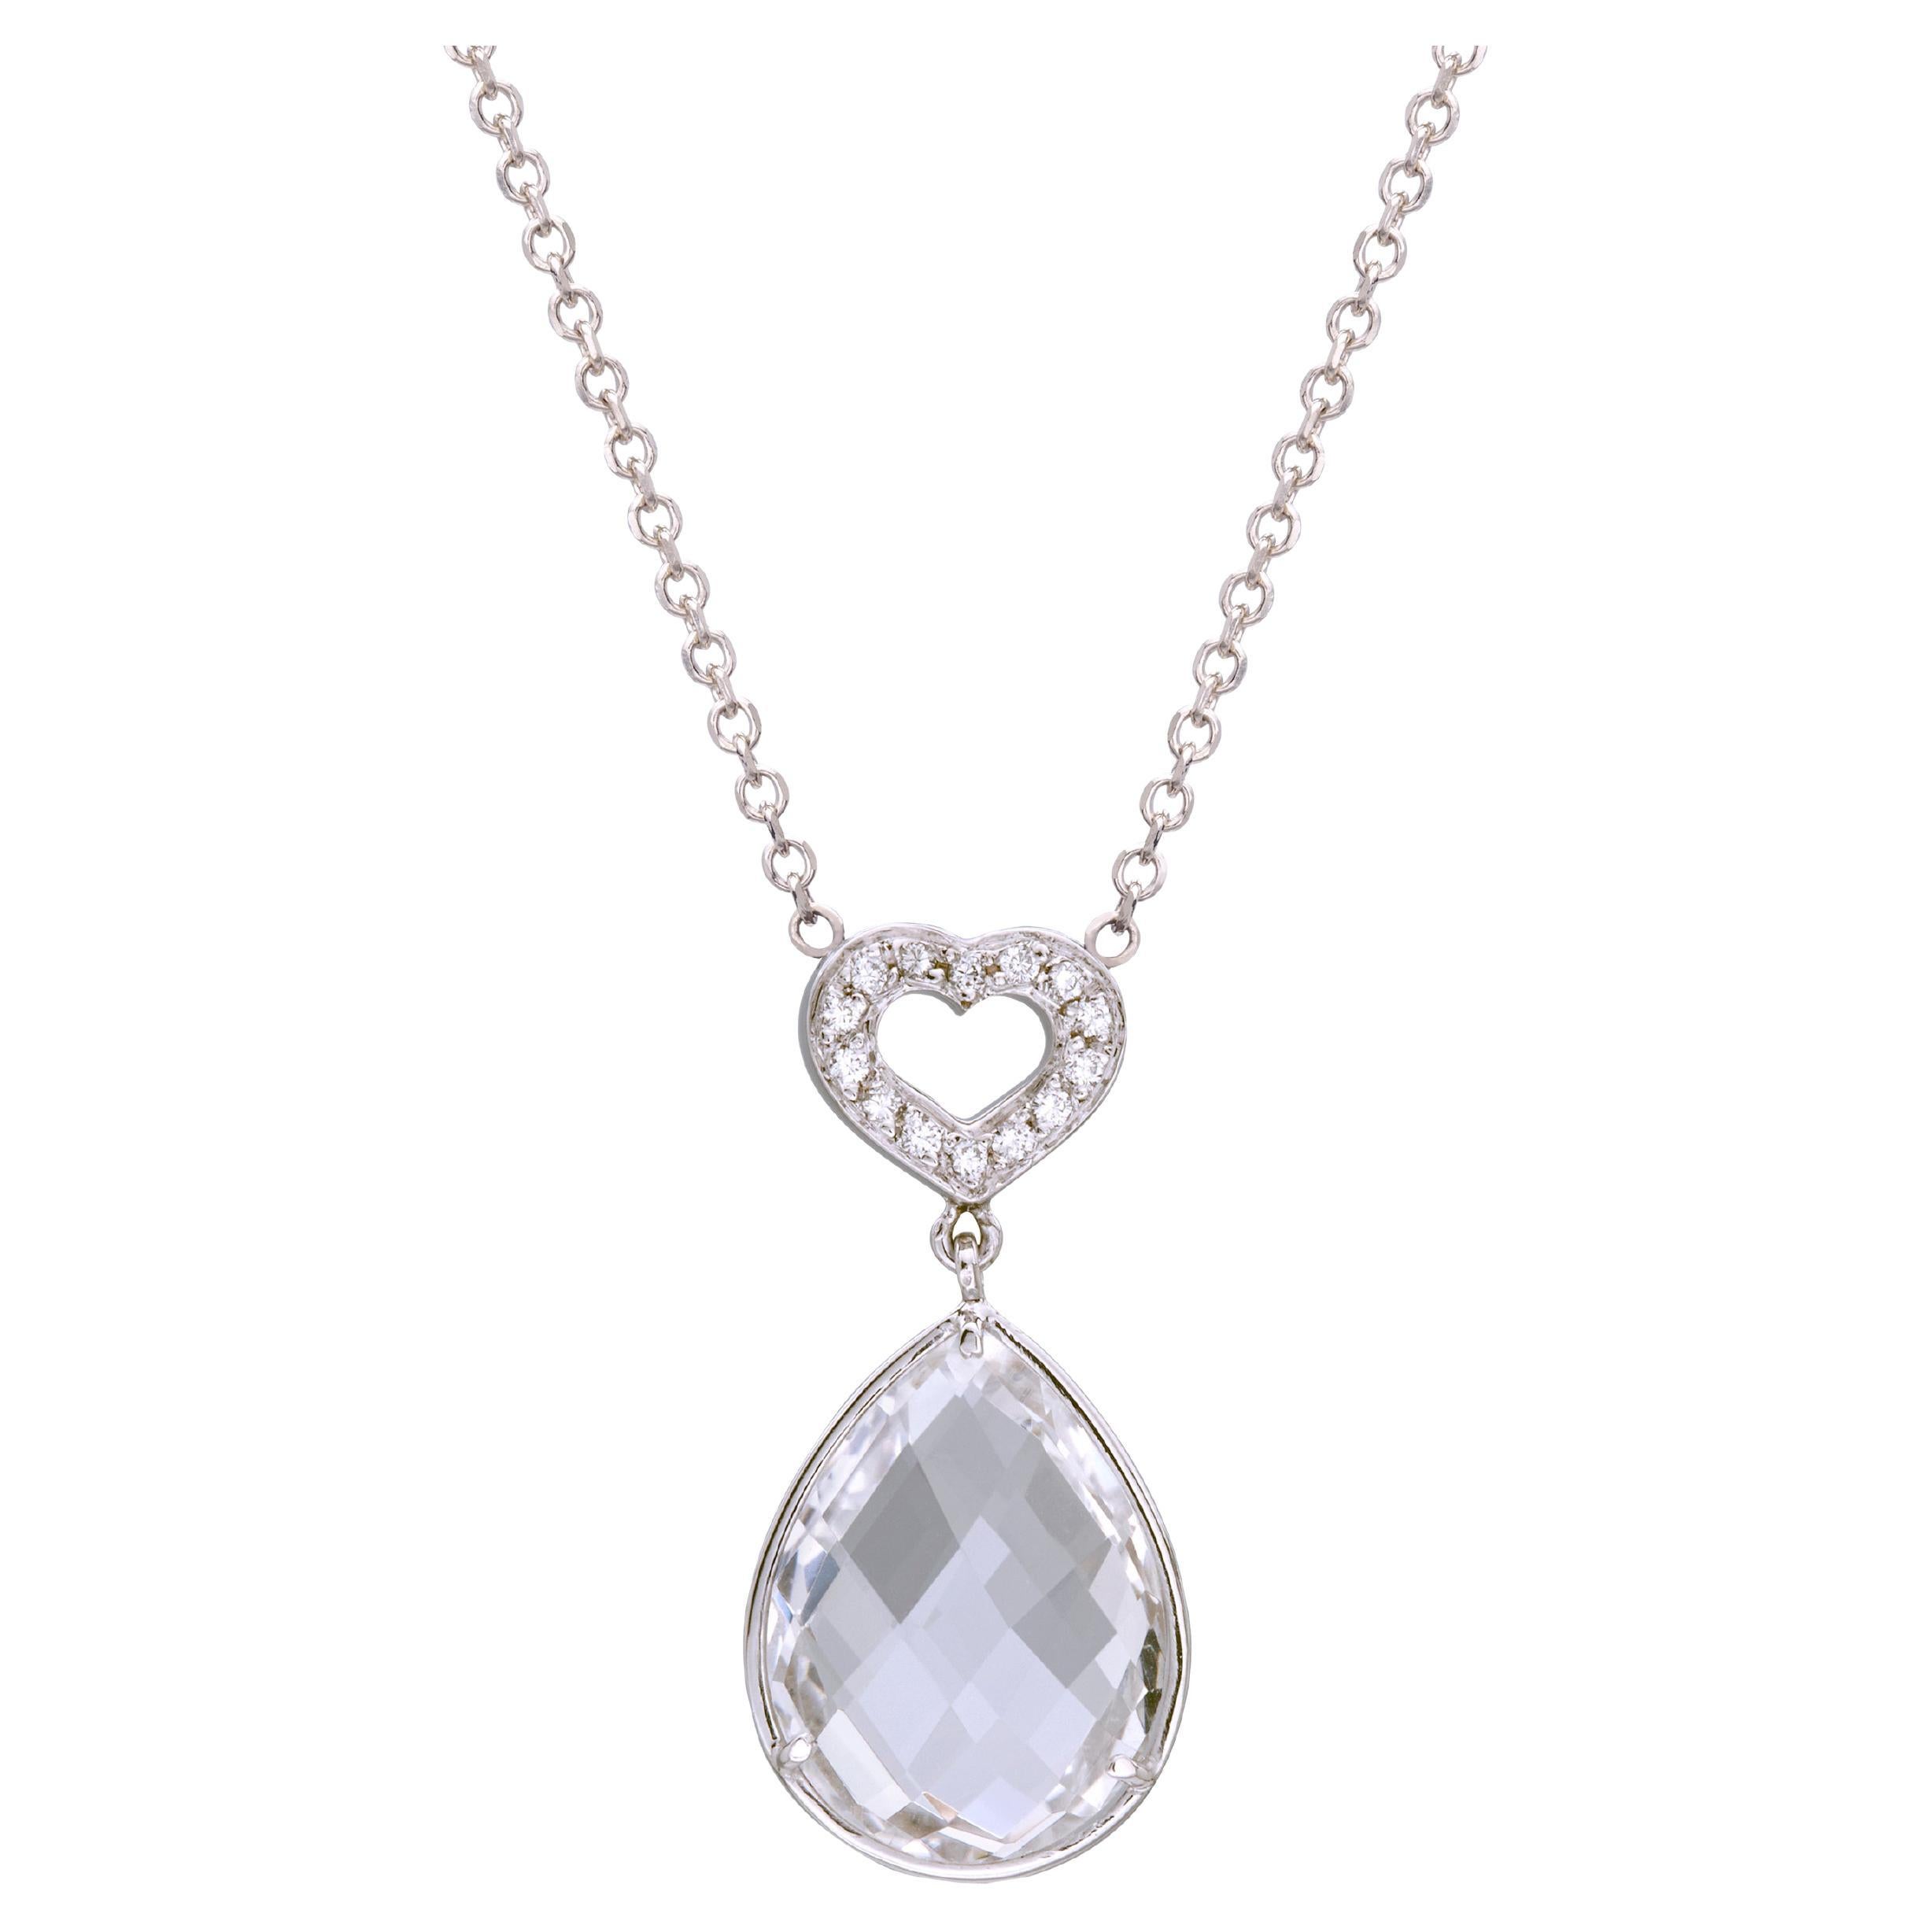 Pendant Necklace in 18Kt White Gold Diamonds Heart and Royal Quartz Pear Drop